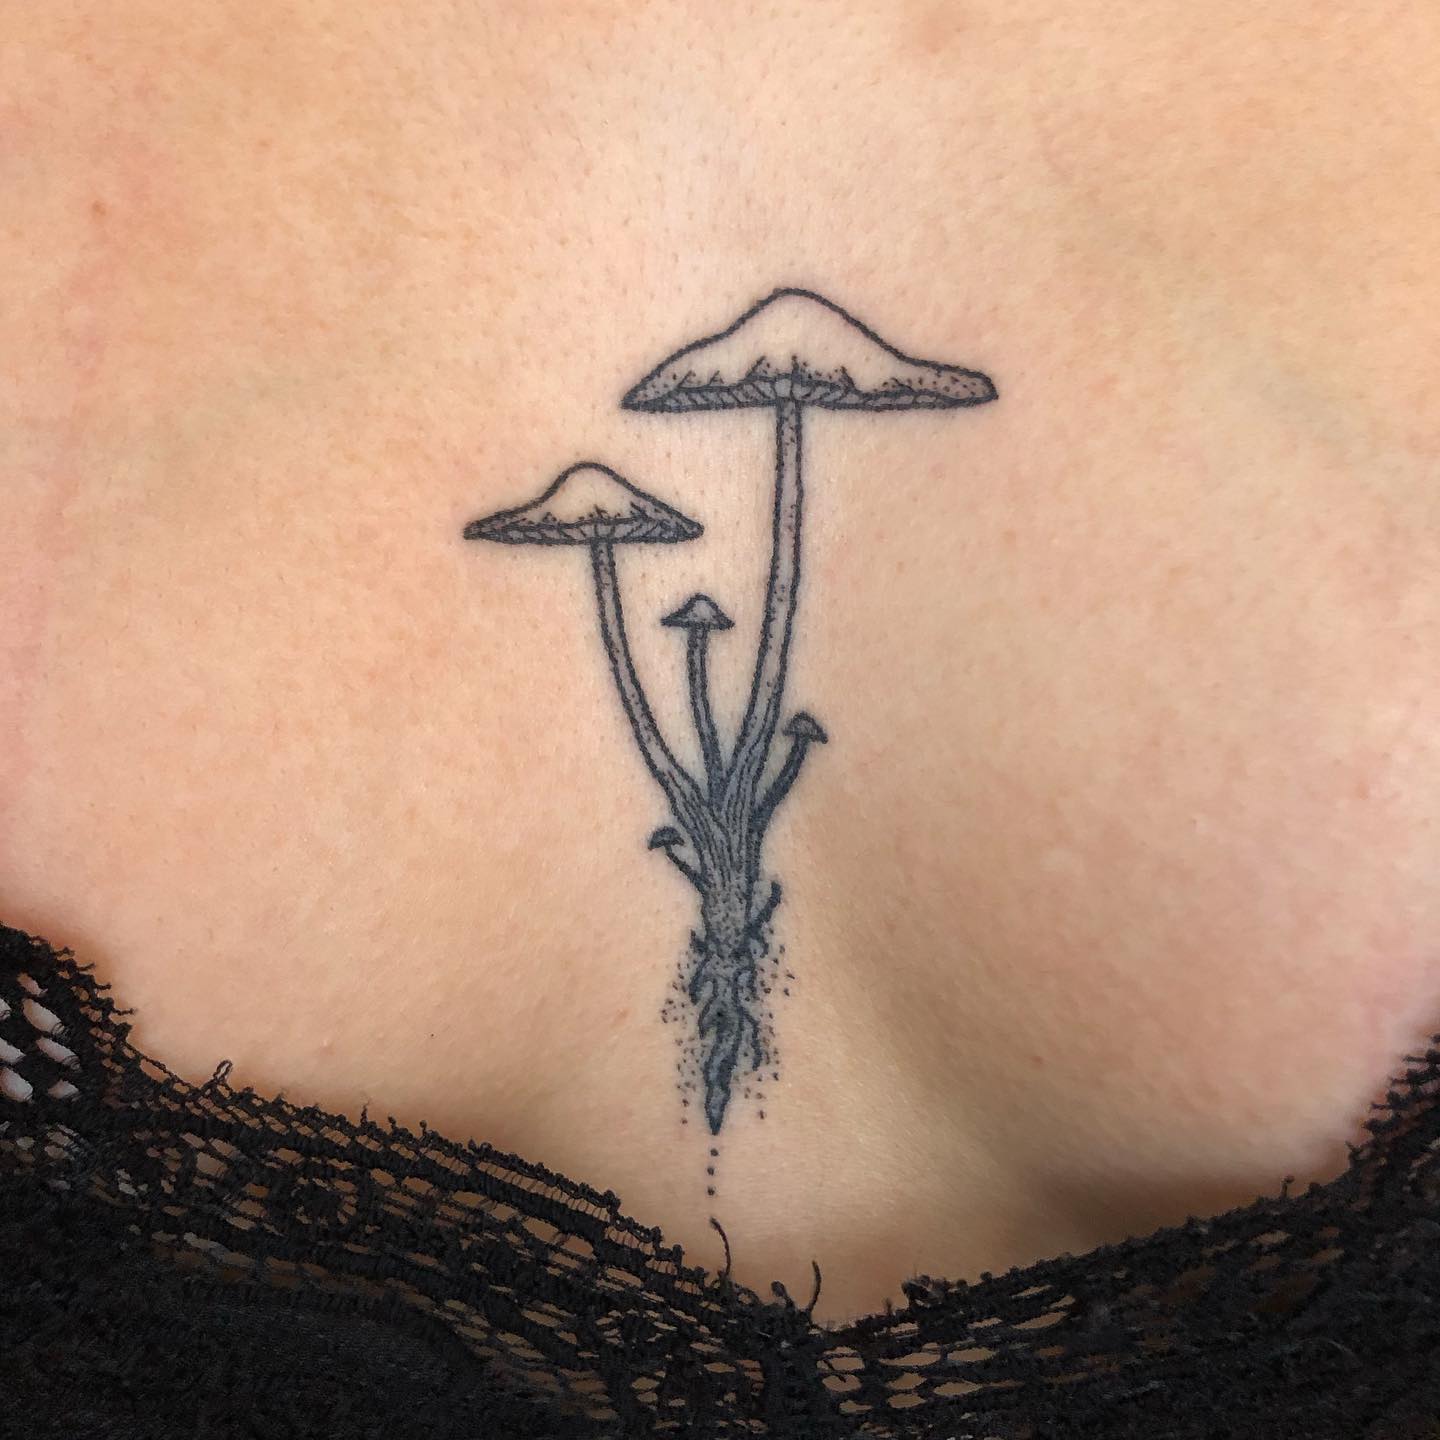 clint farnell recommends between the boobs tattoo pic